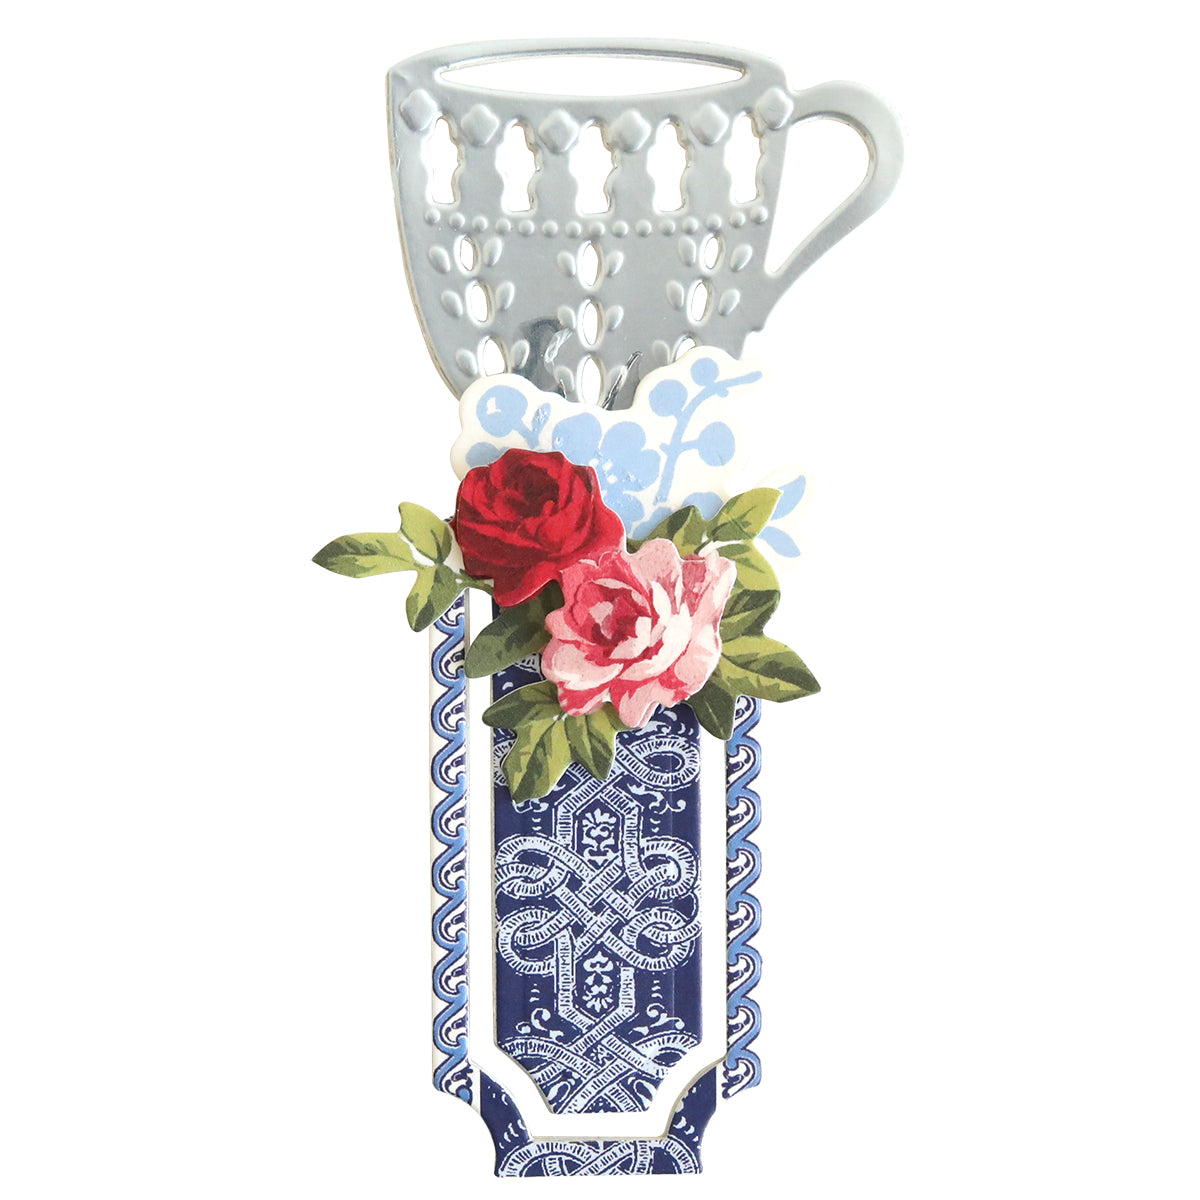 A blue and white Bookmark Dies with roses in it.